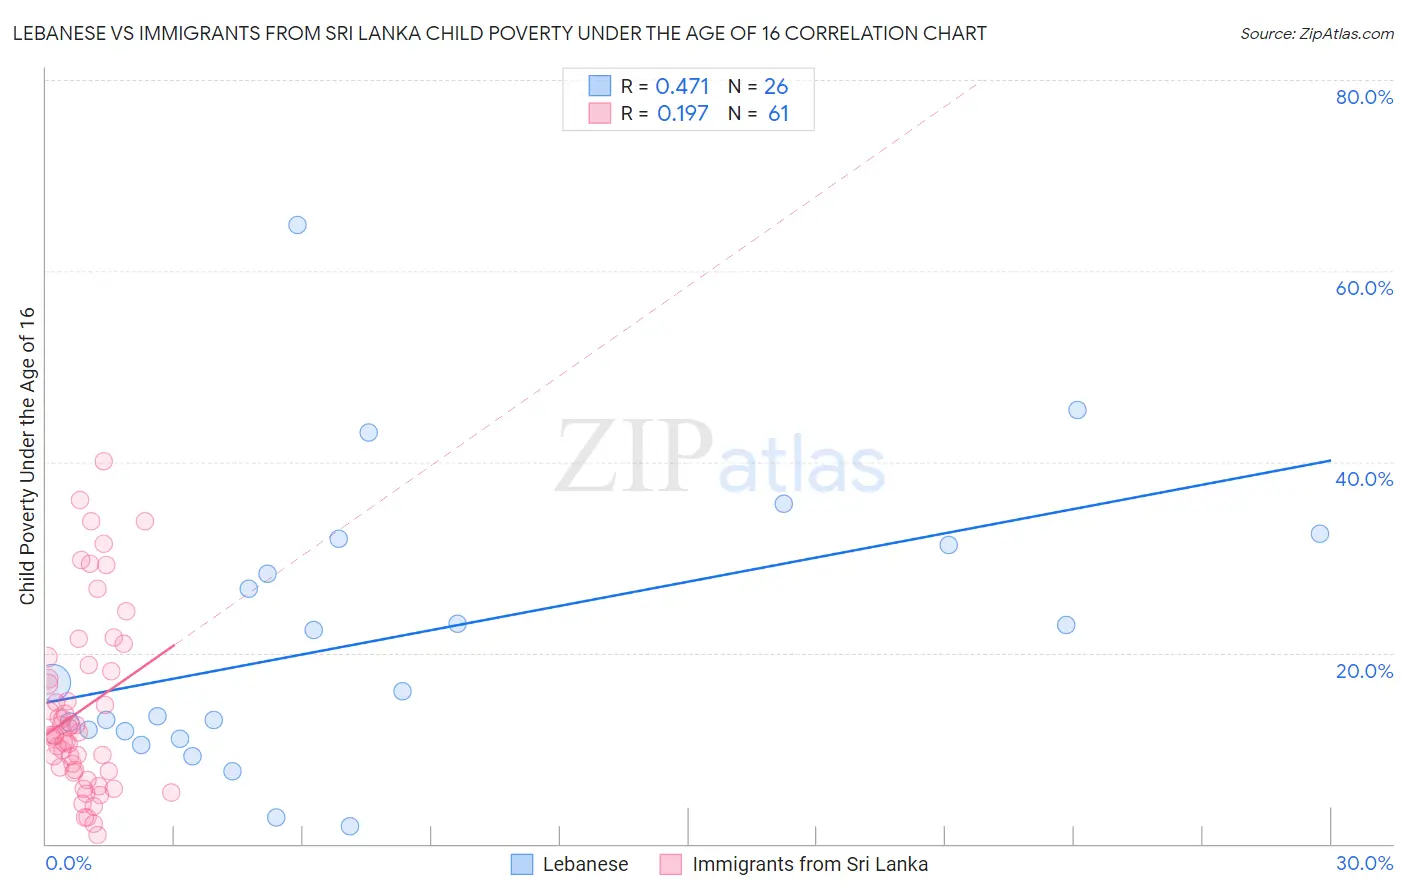 Lebanese vs Immigrants from Sri Lanka Child Poverty Under the Age of 16